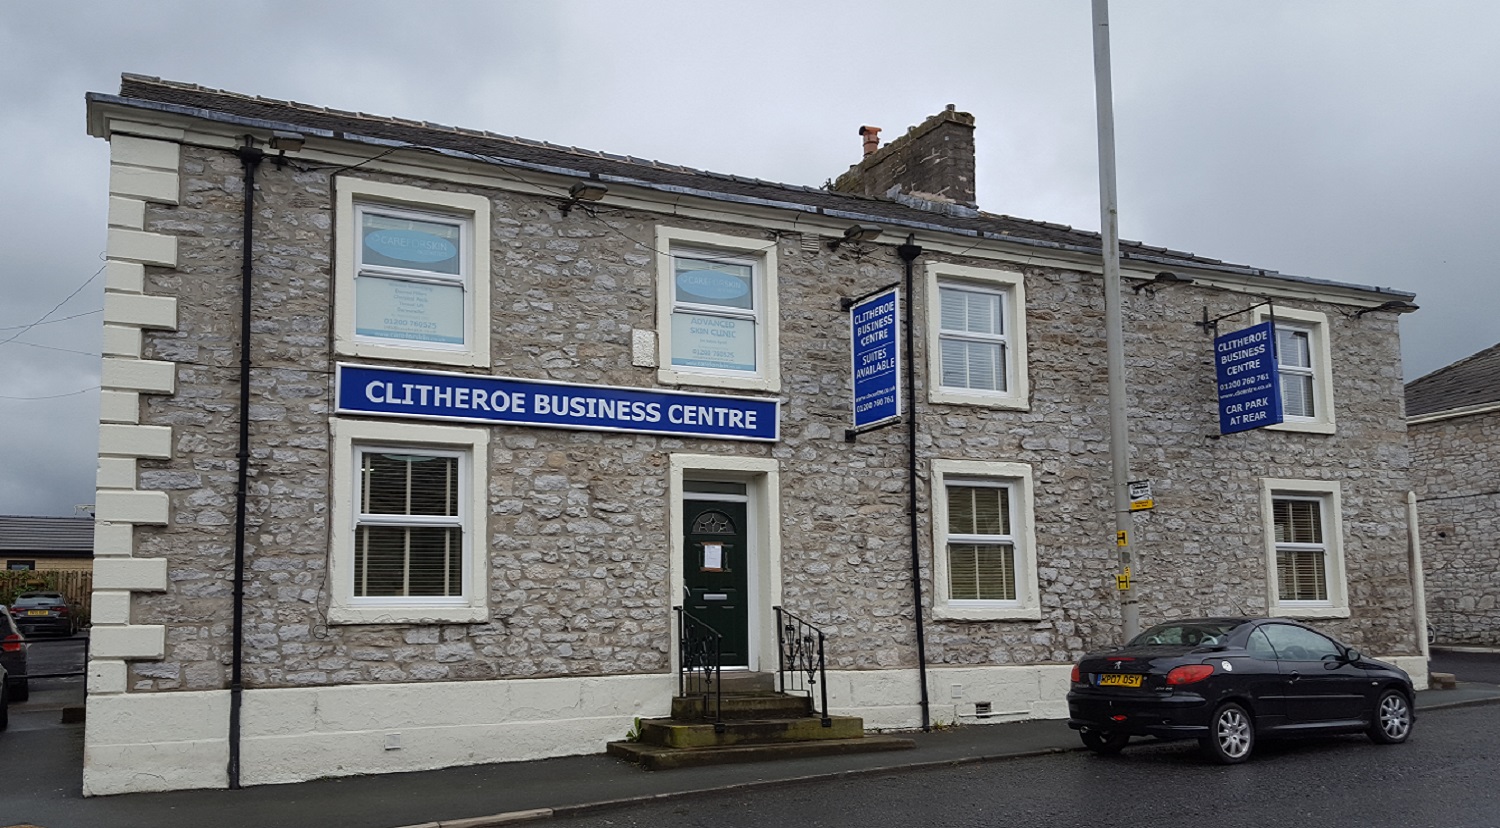 Clitheroe job centre opening hours